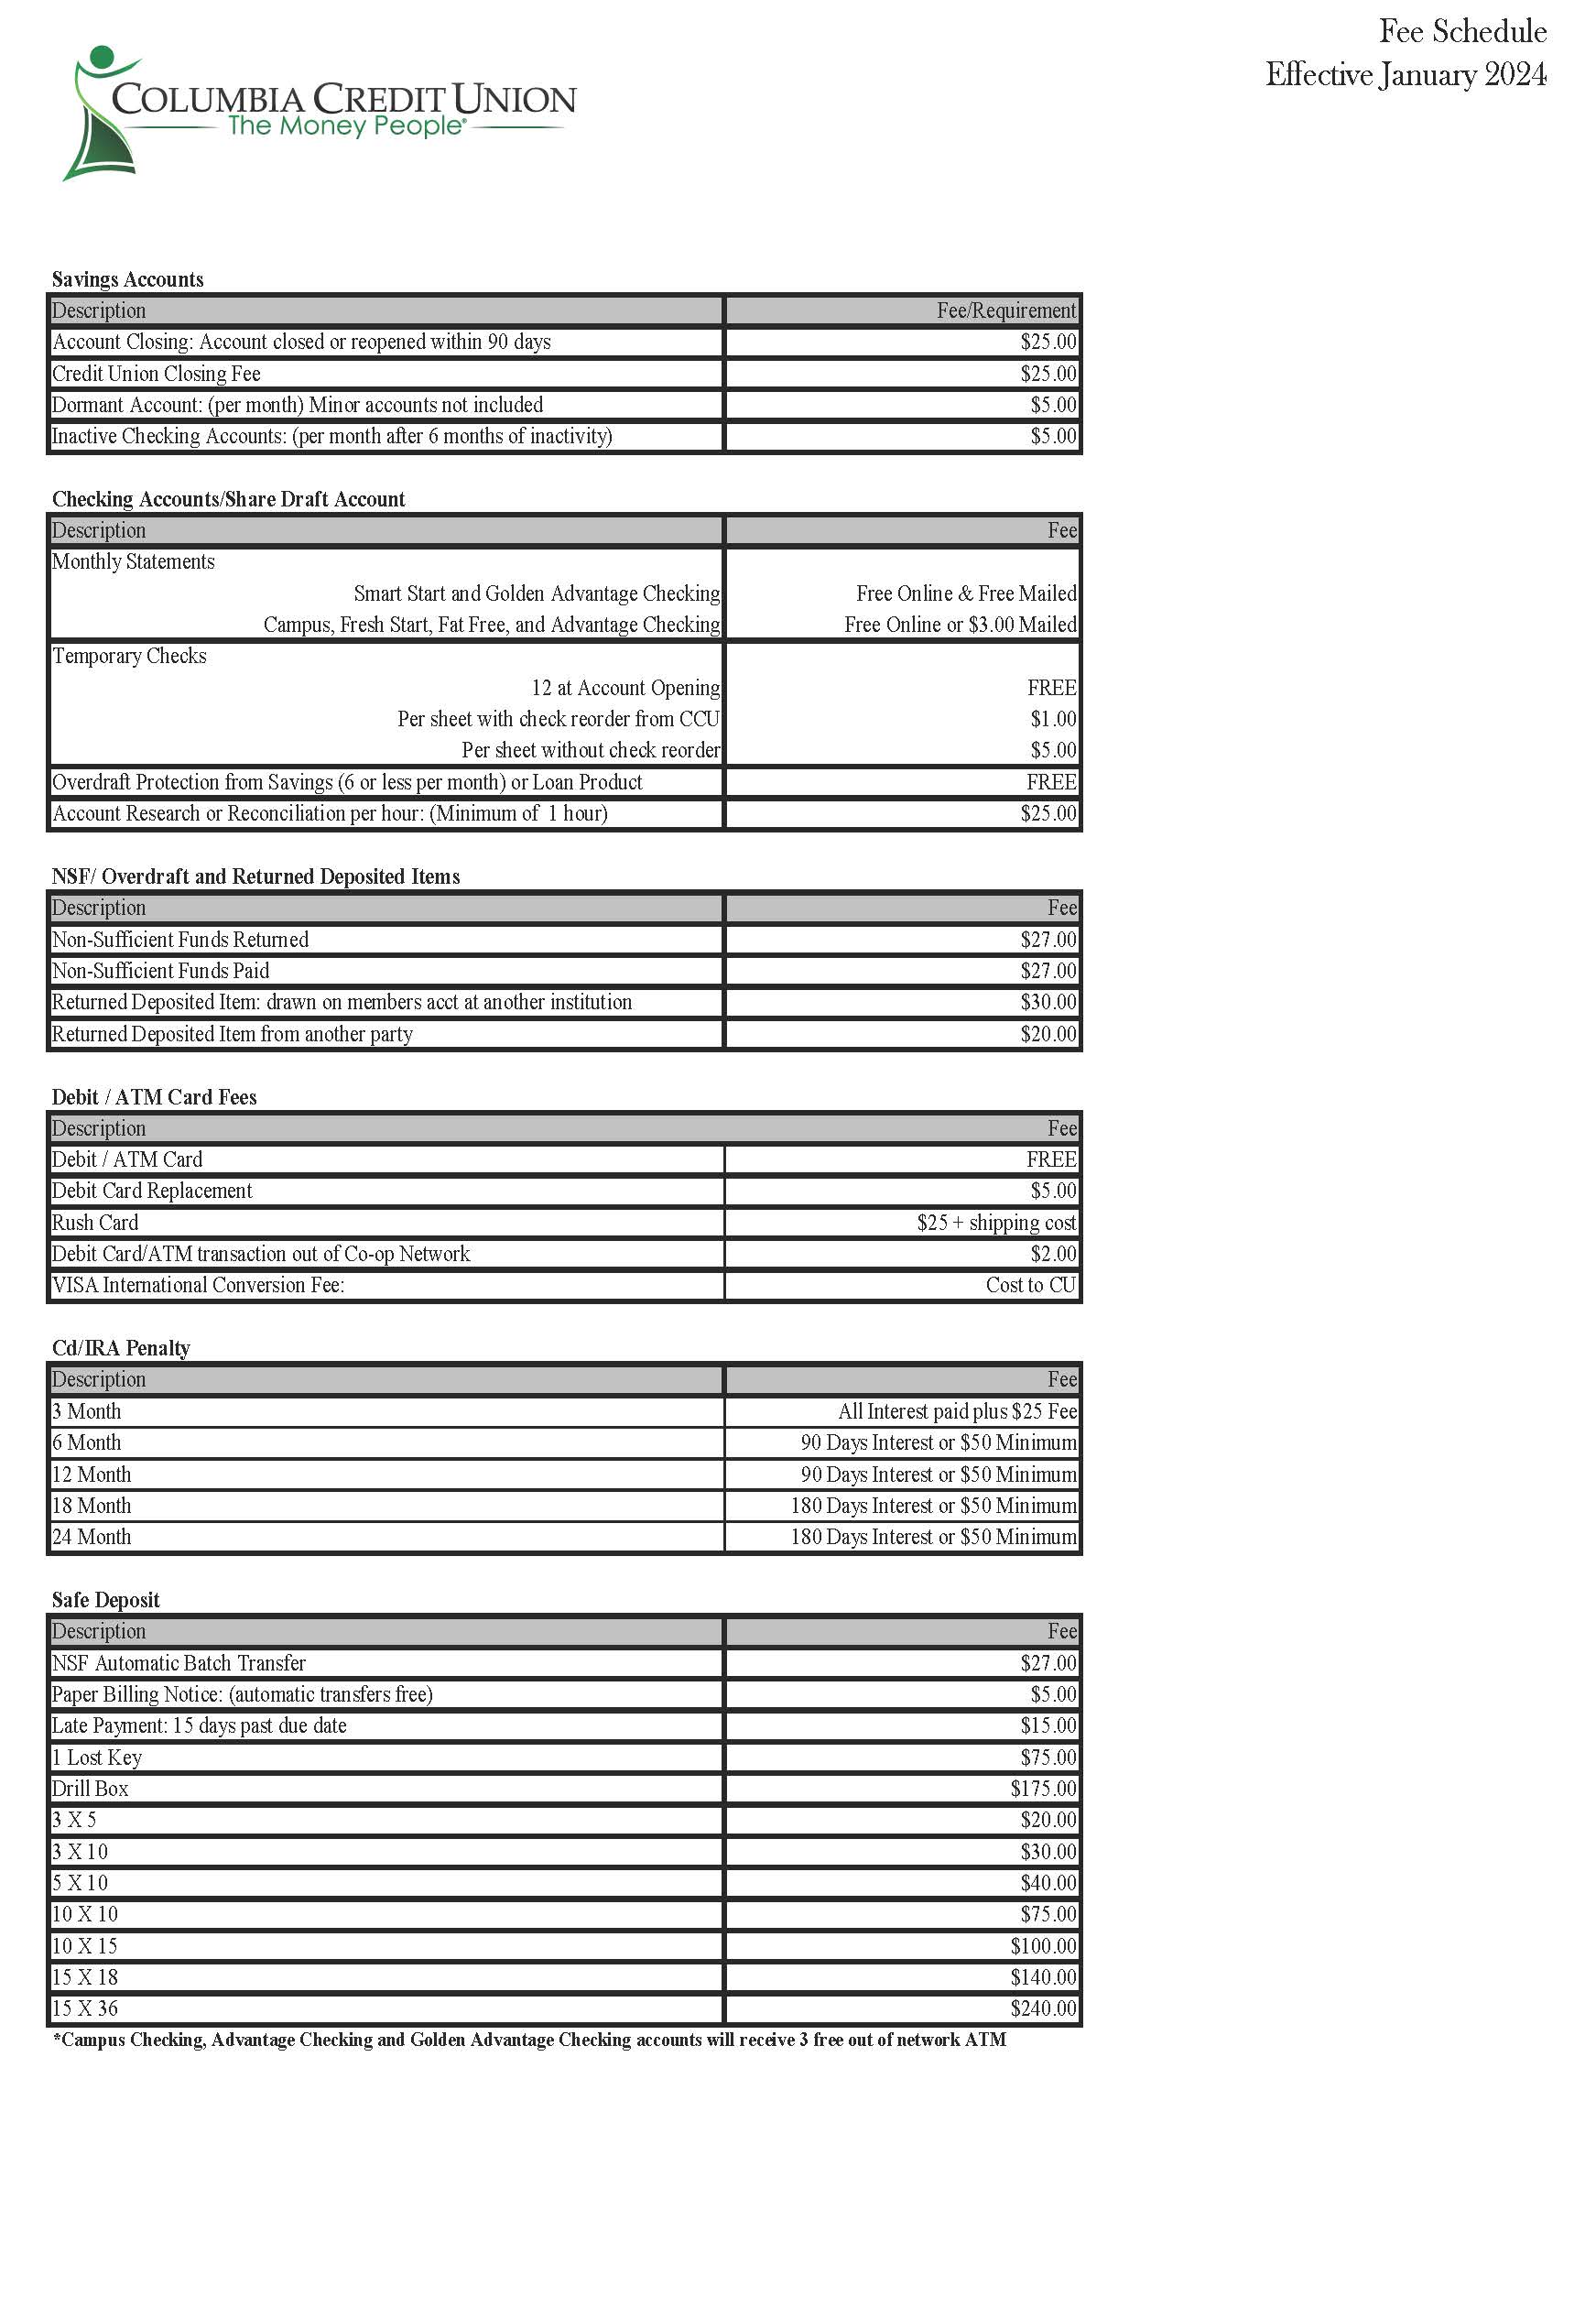 Fee Schedule 2024 Page 1 